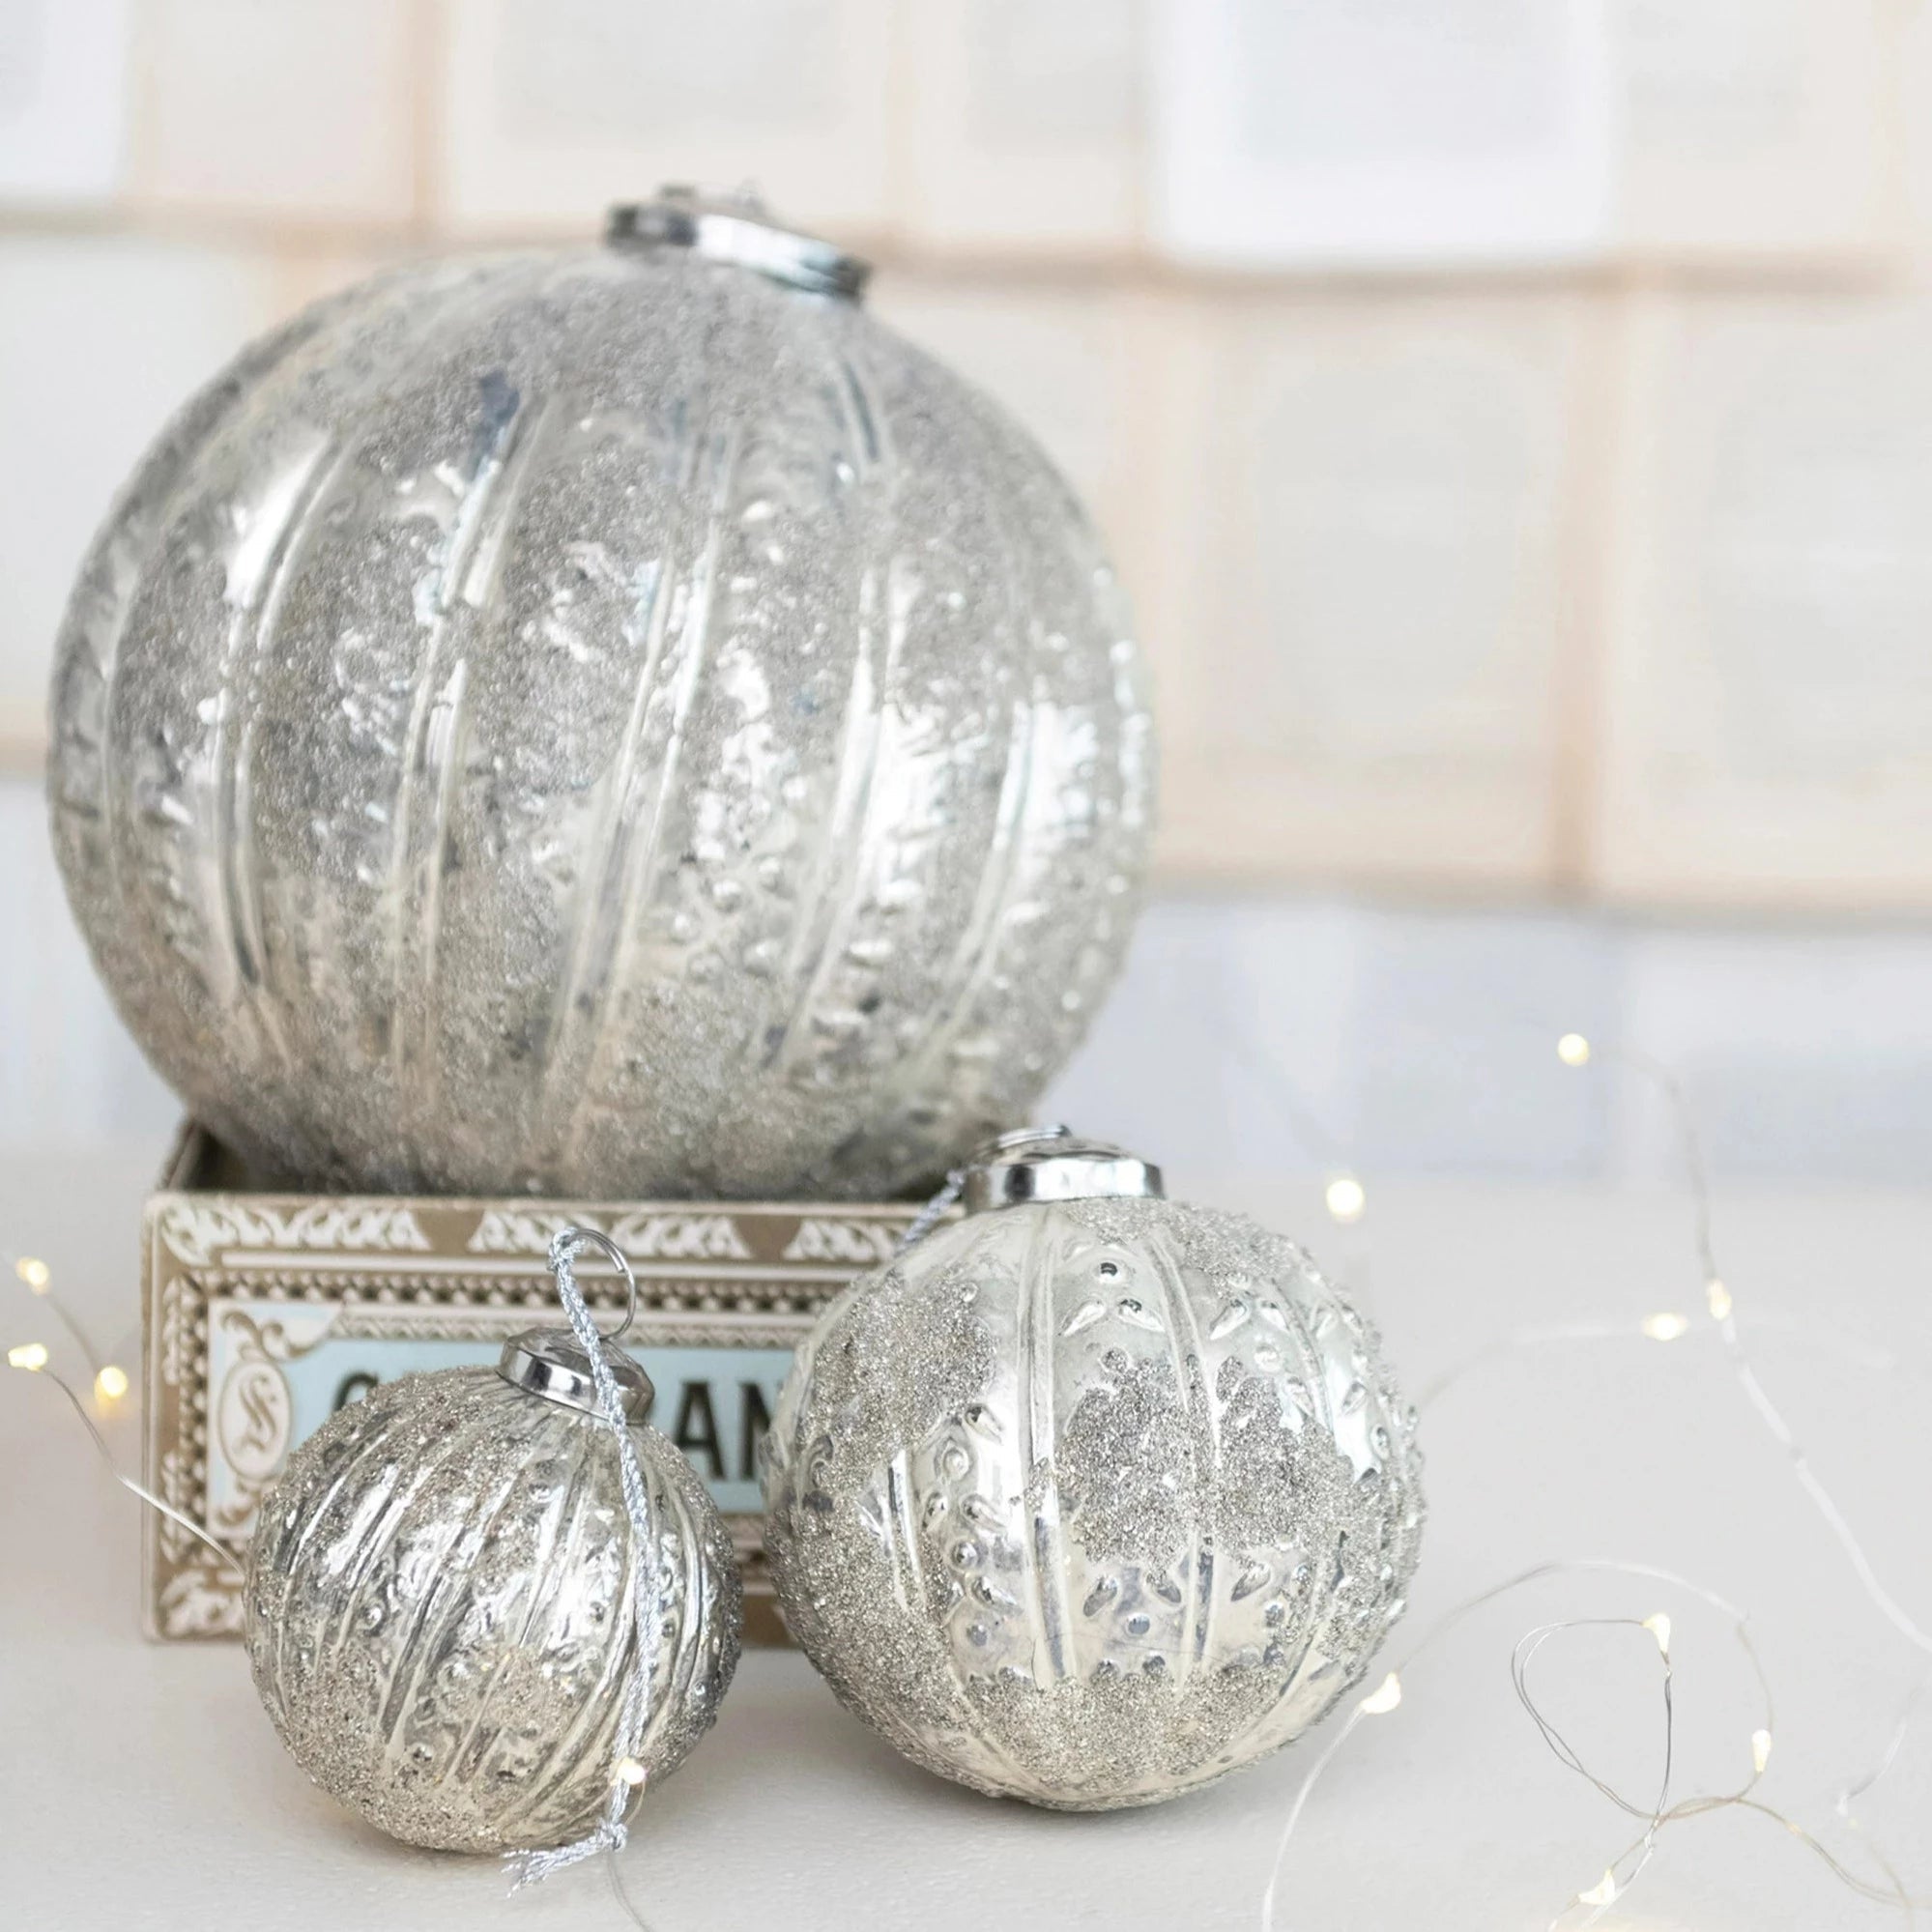 Embossed & Flocked Seed Glass Ball Ornament